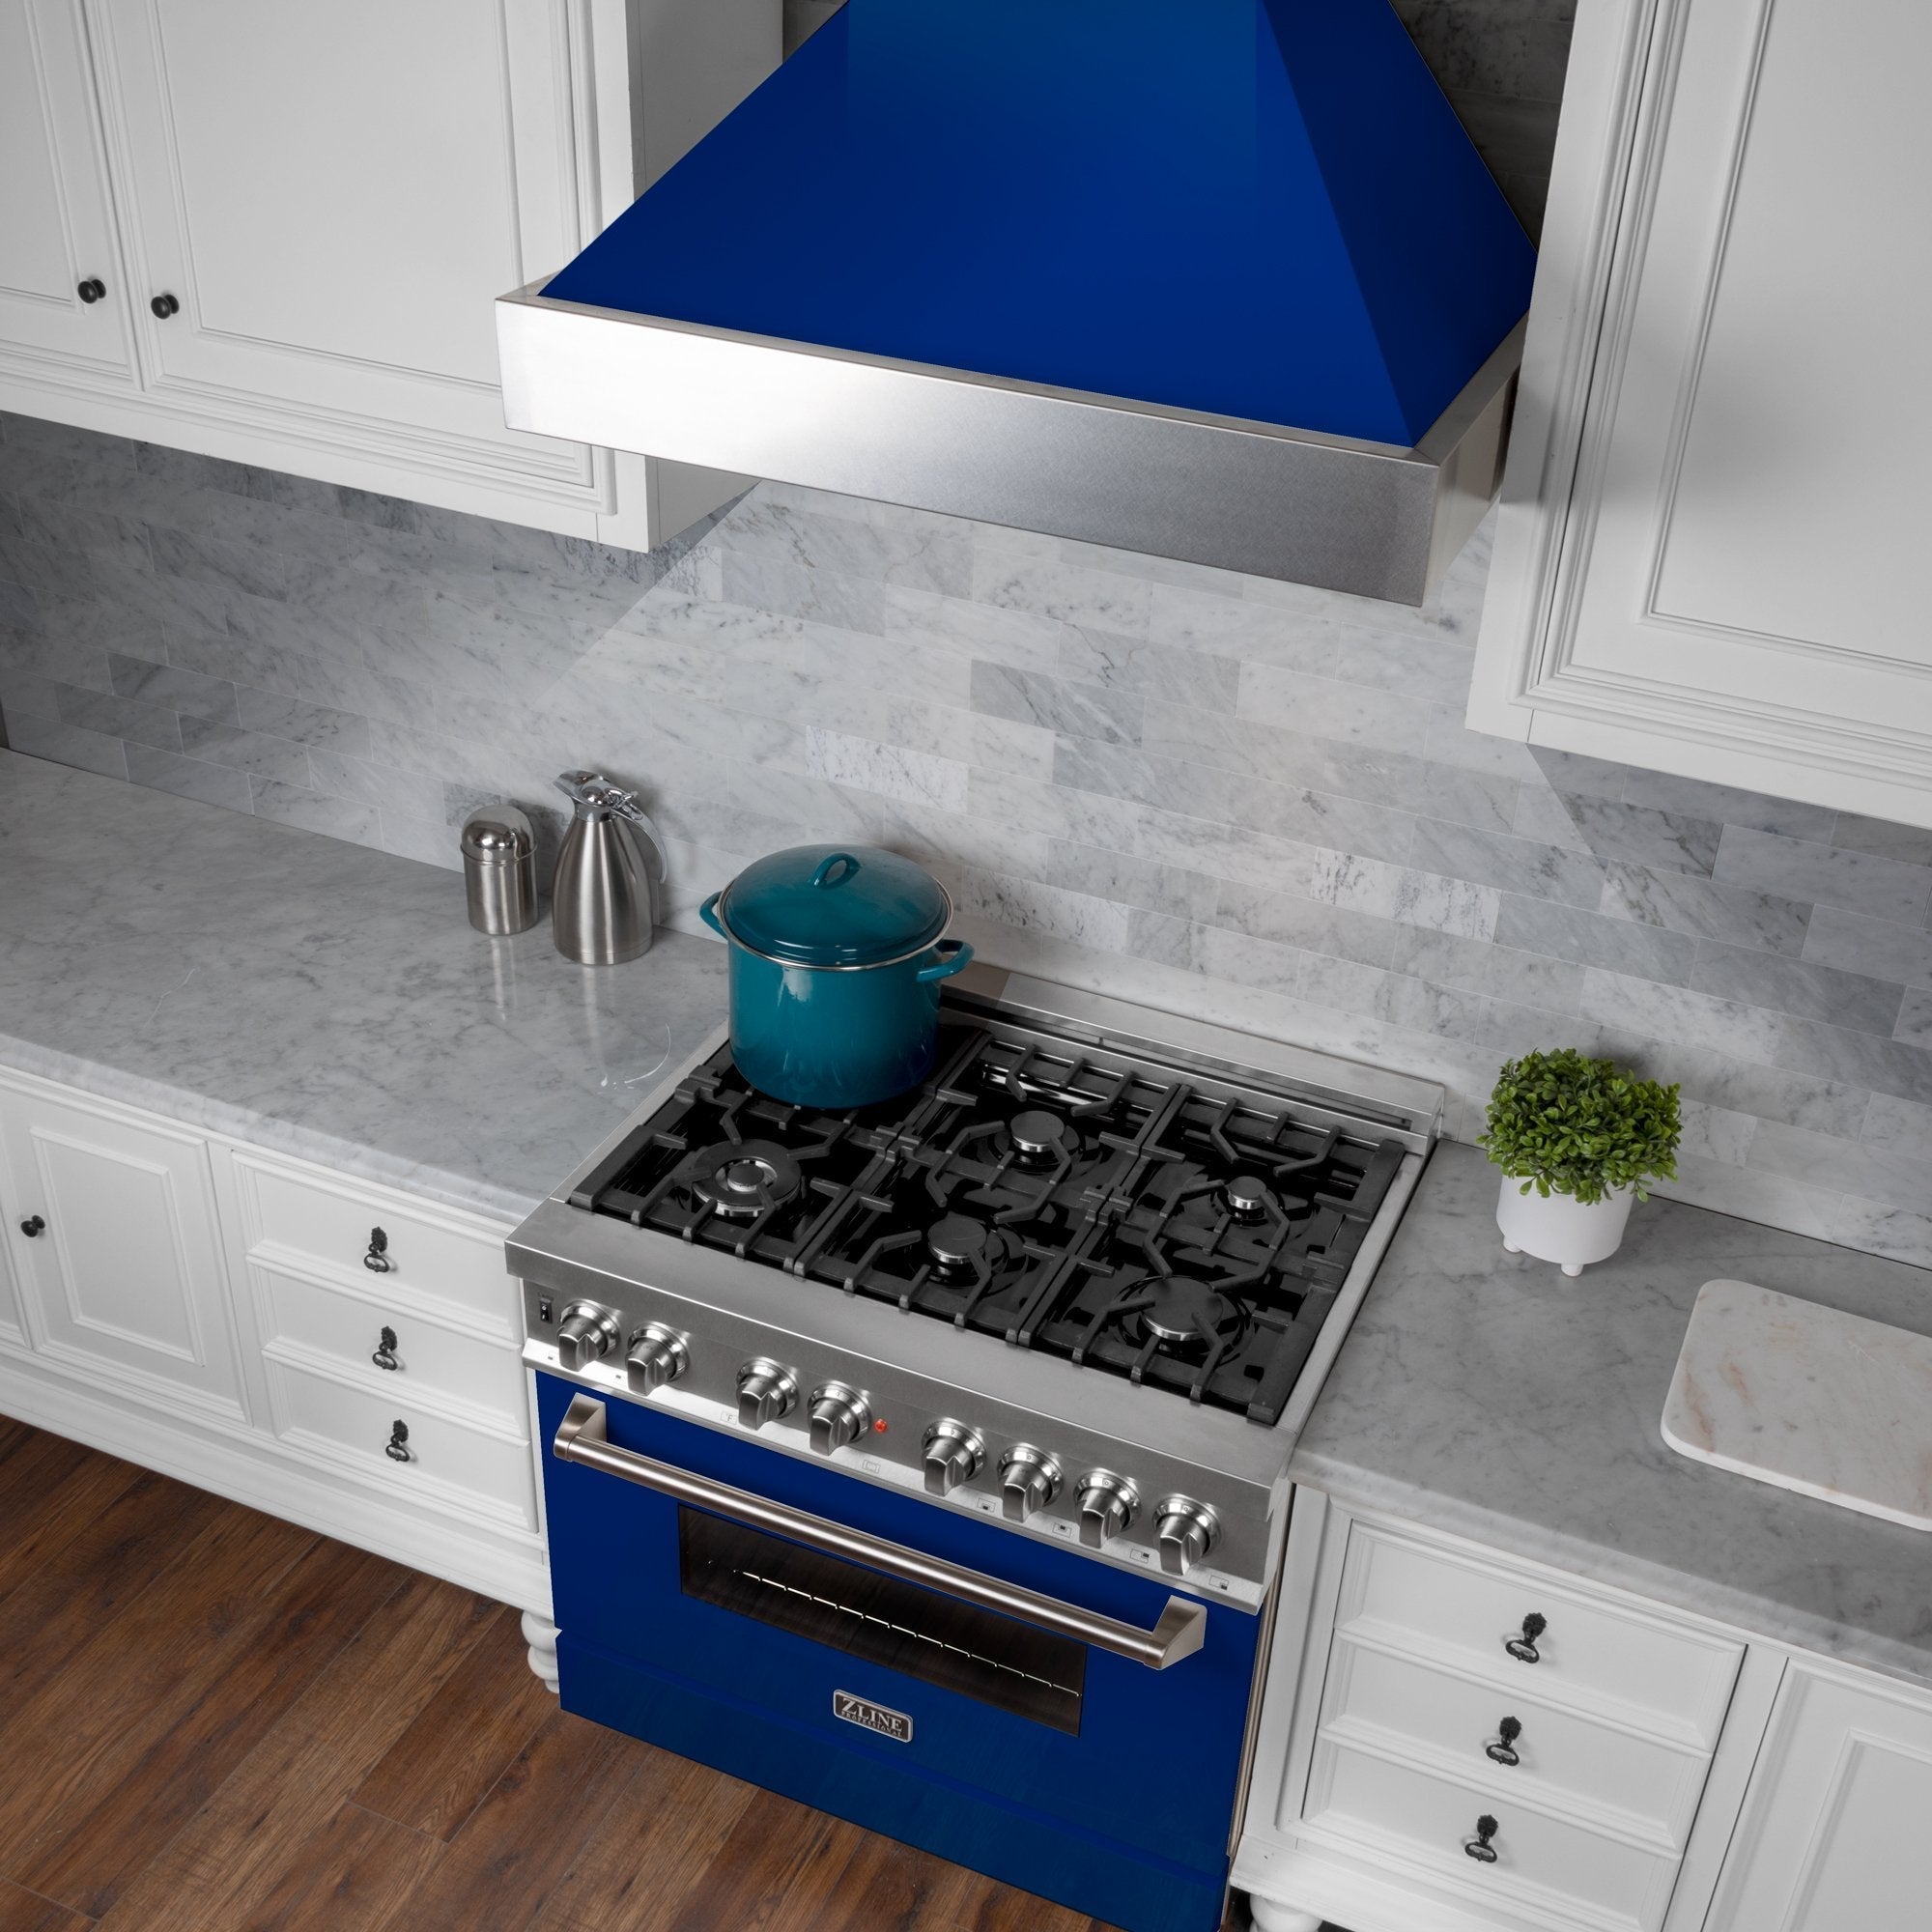 ZLINE Ducted Fingerprint Resistant Stainless Steel Range Hood with Blue Gloss Shell (8654BG) with short chimney in a kitchen with matching blue gloss range from above.